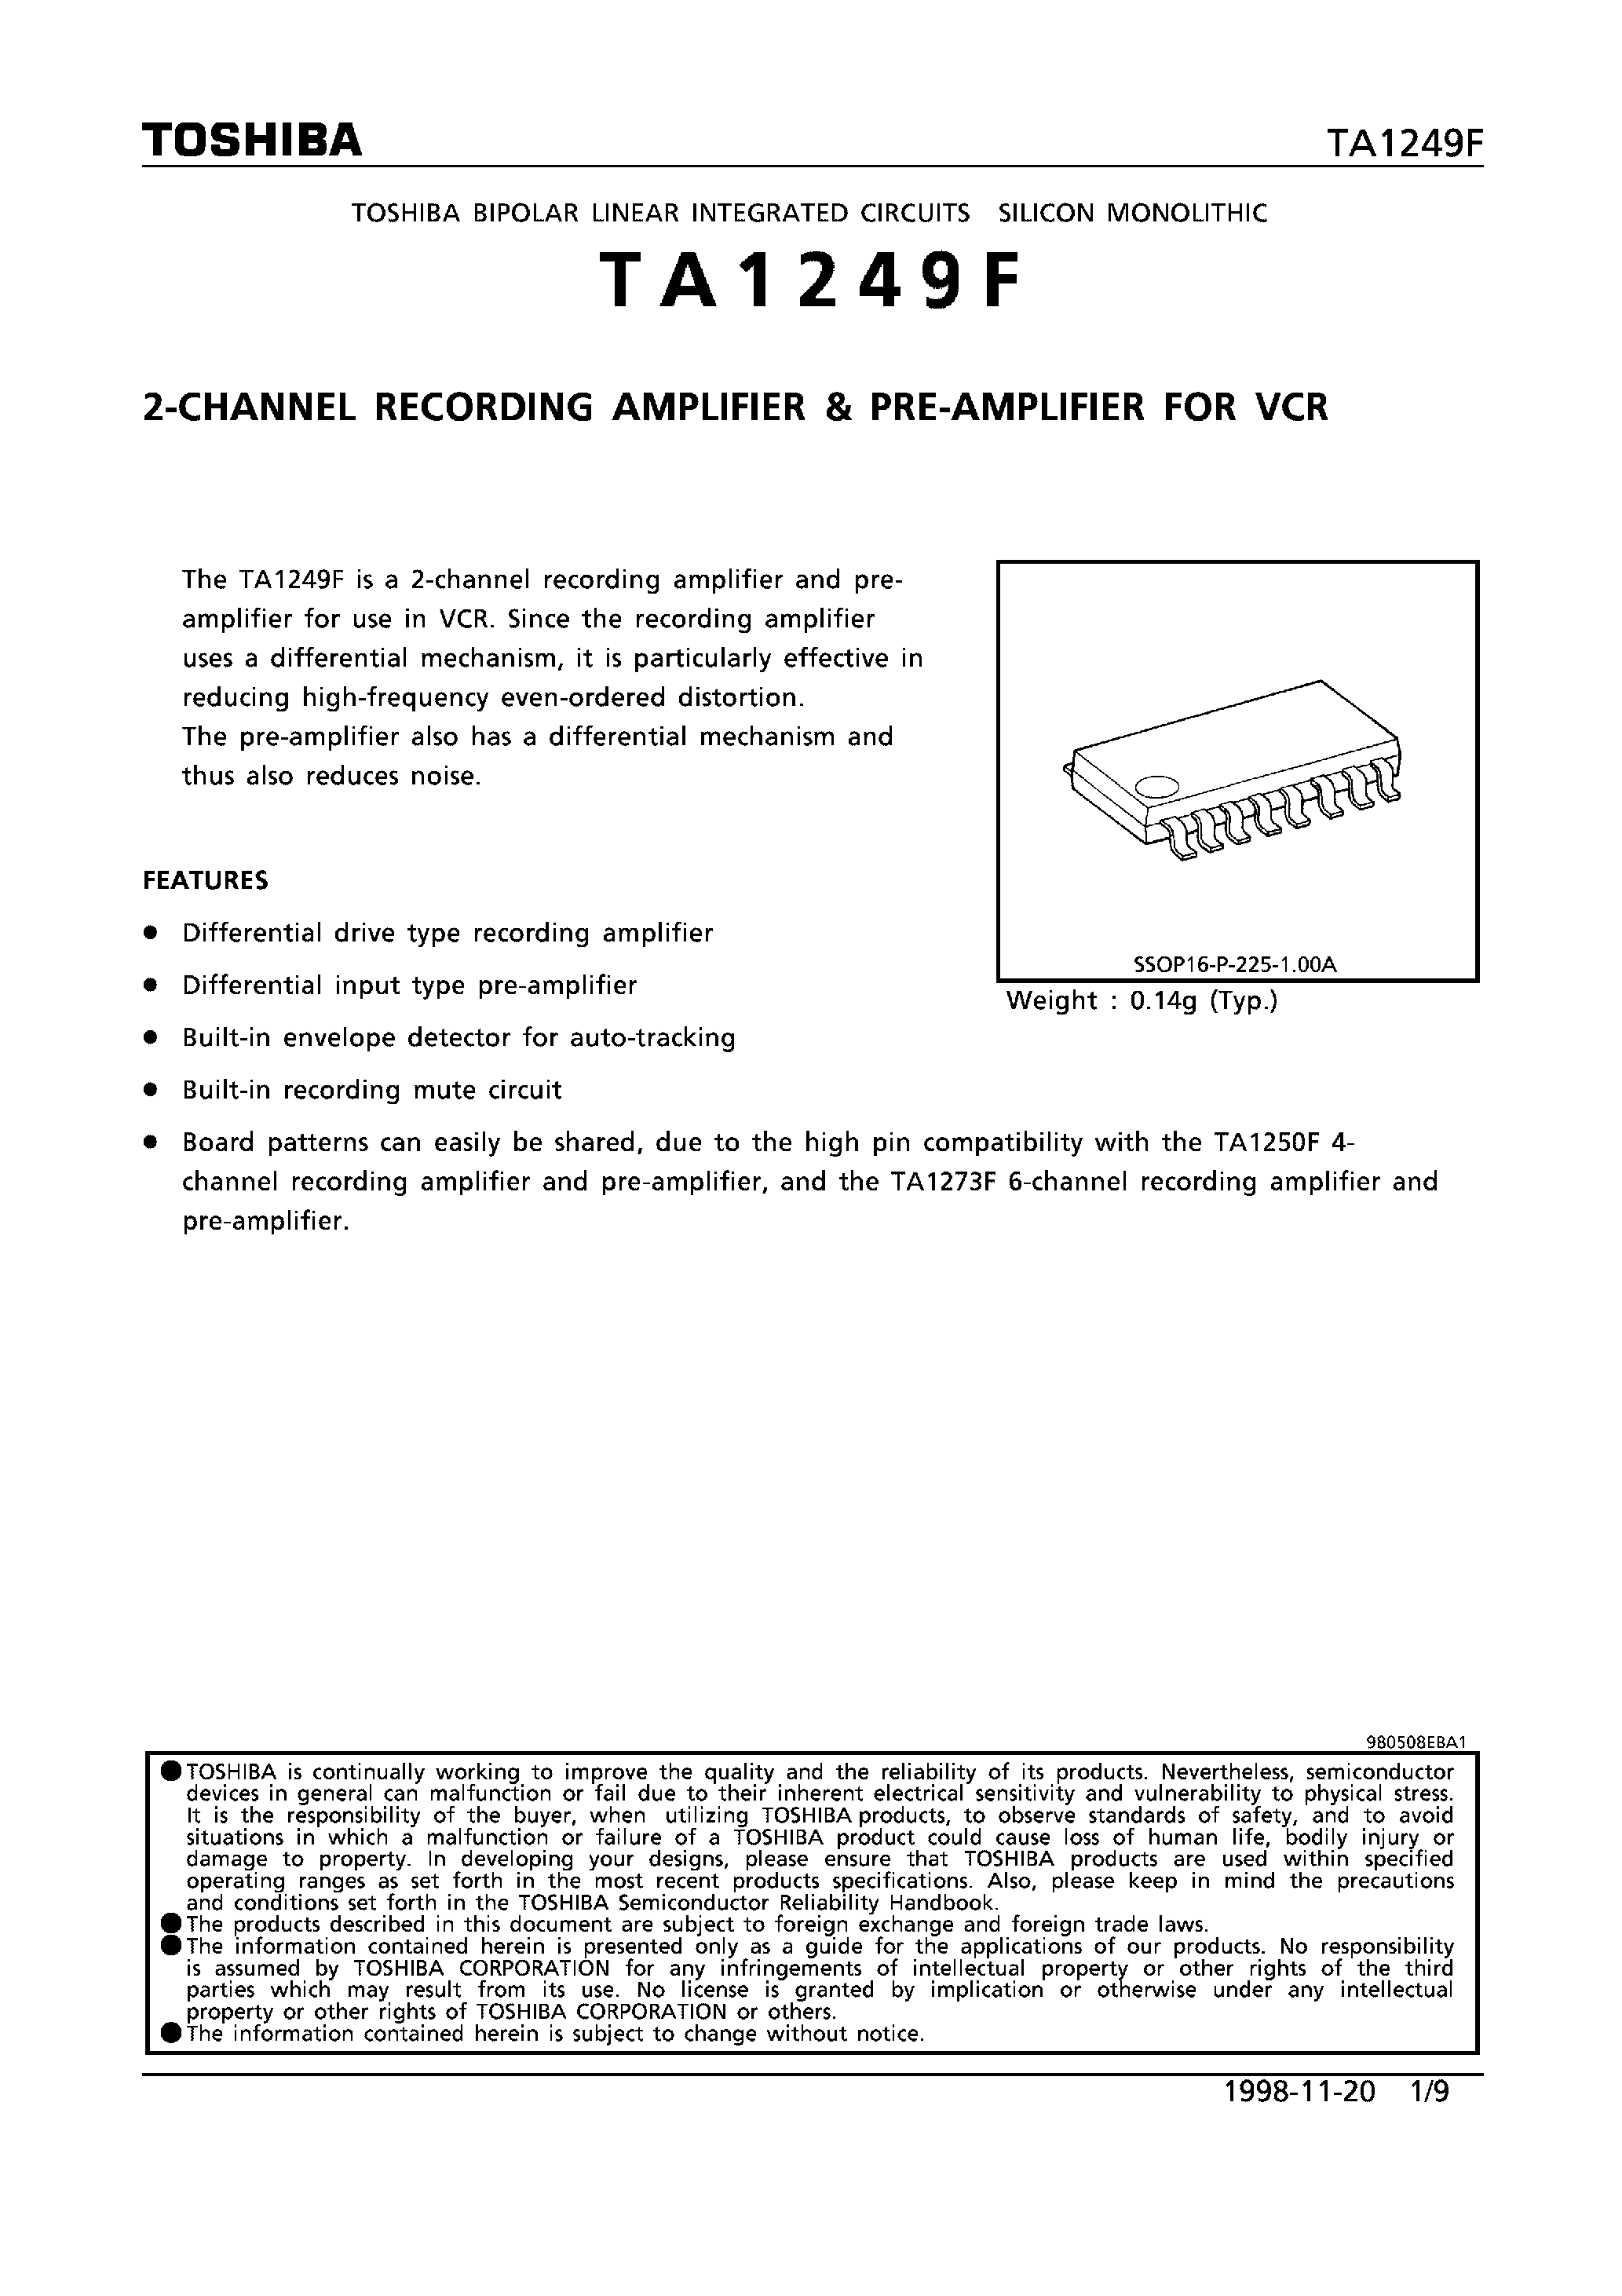 Datasheet TA1249F - 2-CHANNEL RECORDING AMPLIFIER & PRE-AMPLIFIER FOR VCR page 1